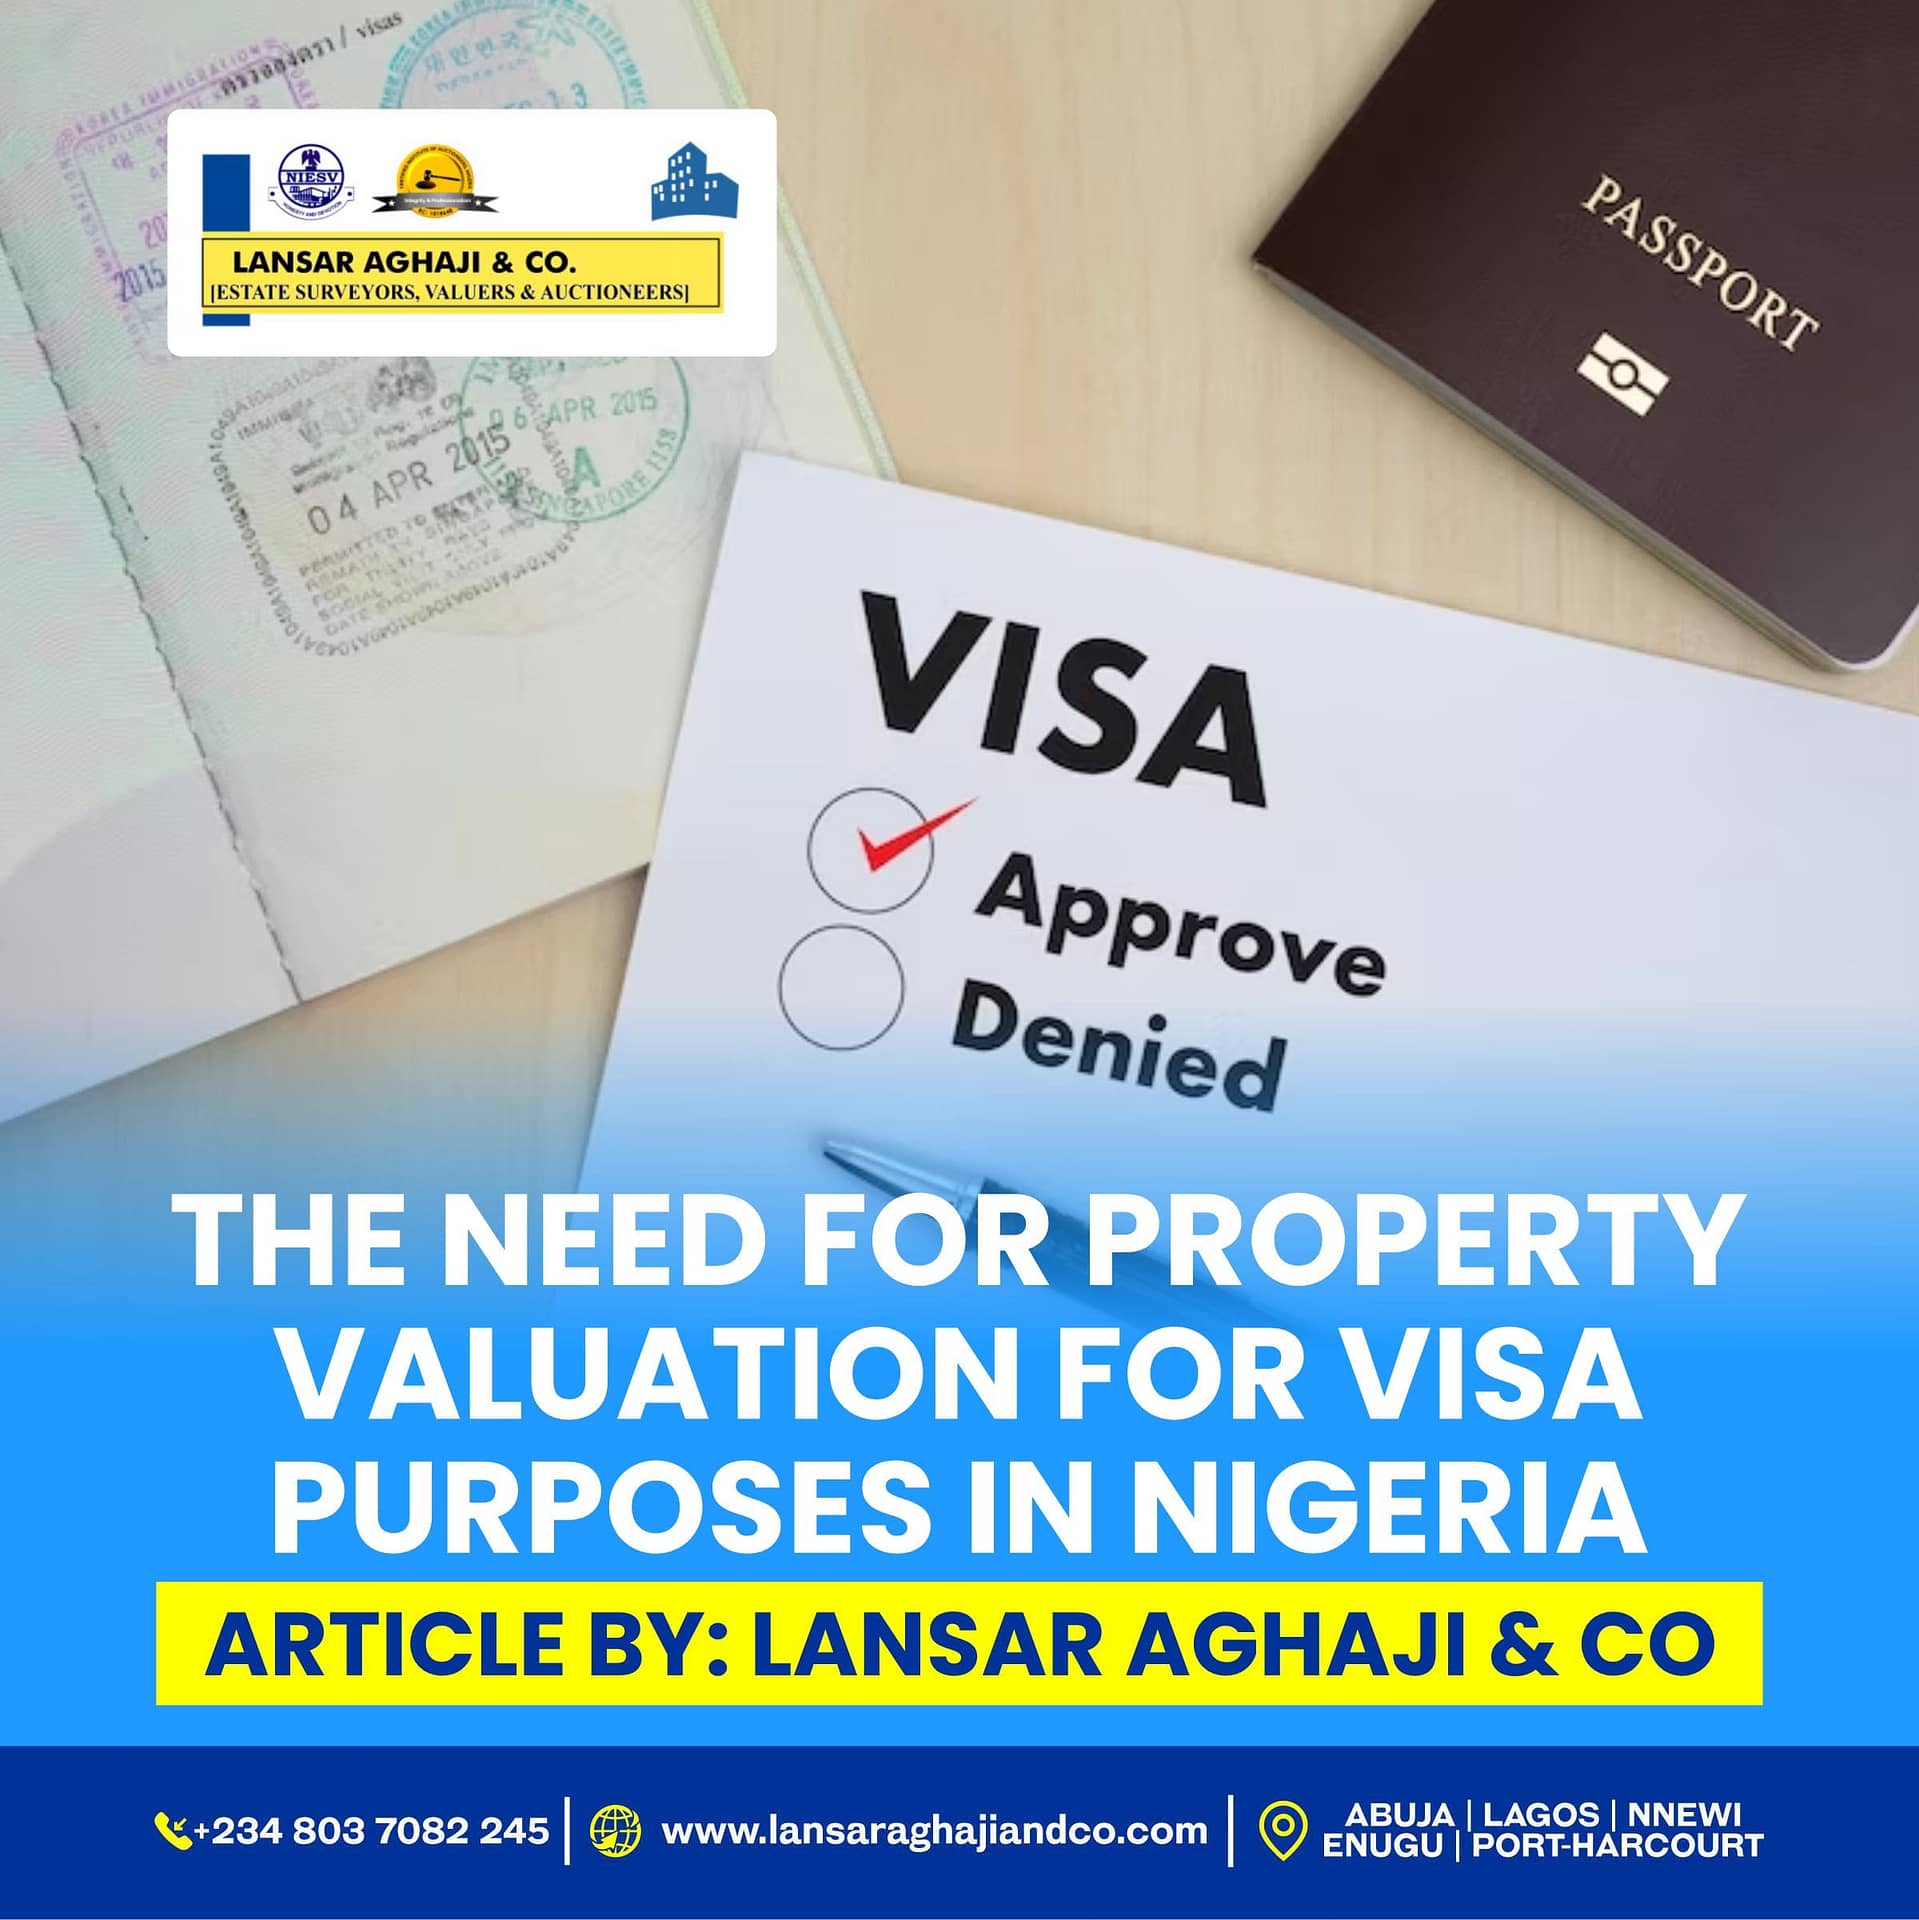 The Need for Property Valuation for Visa Purpose in Nigeria